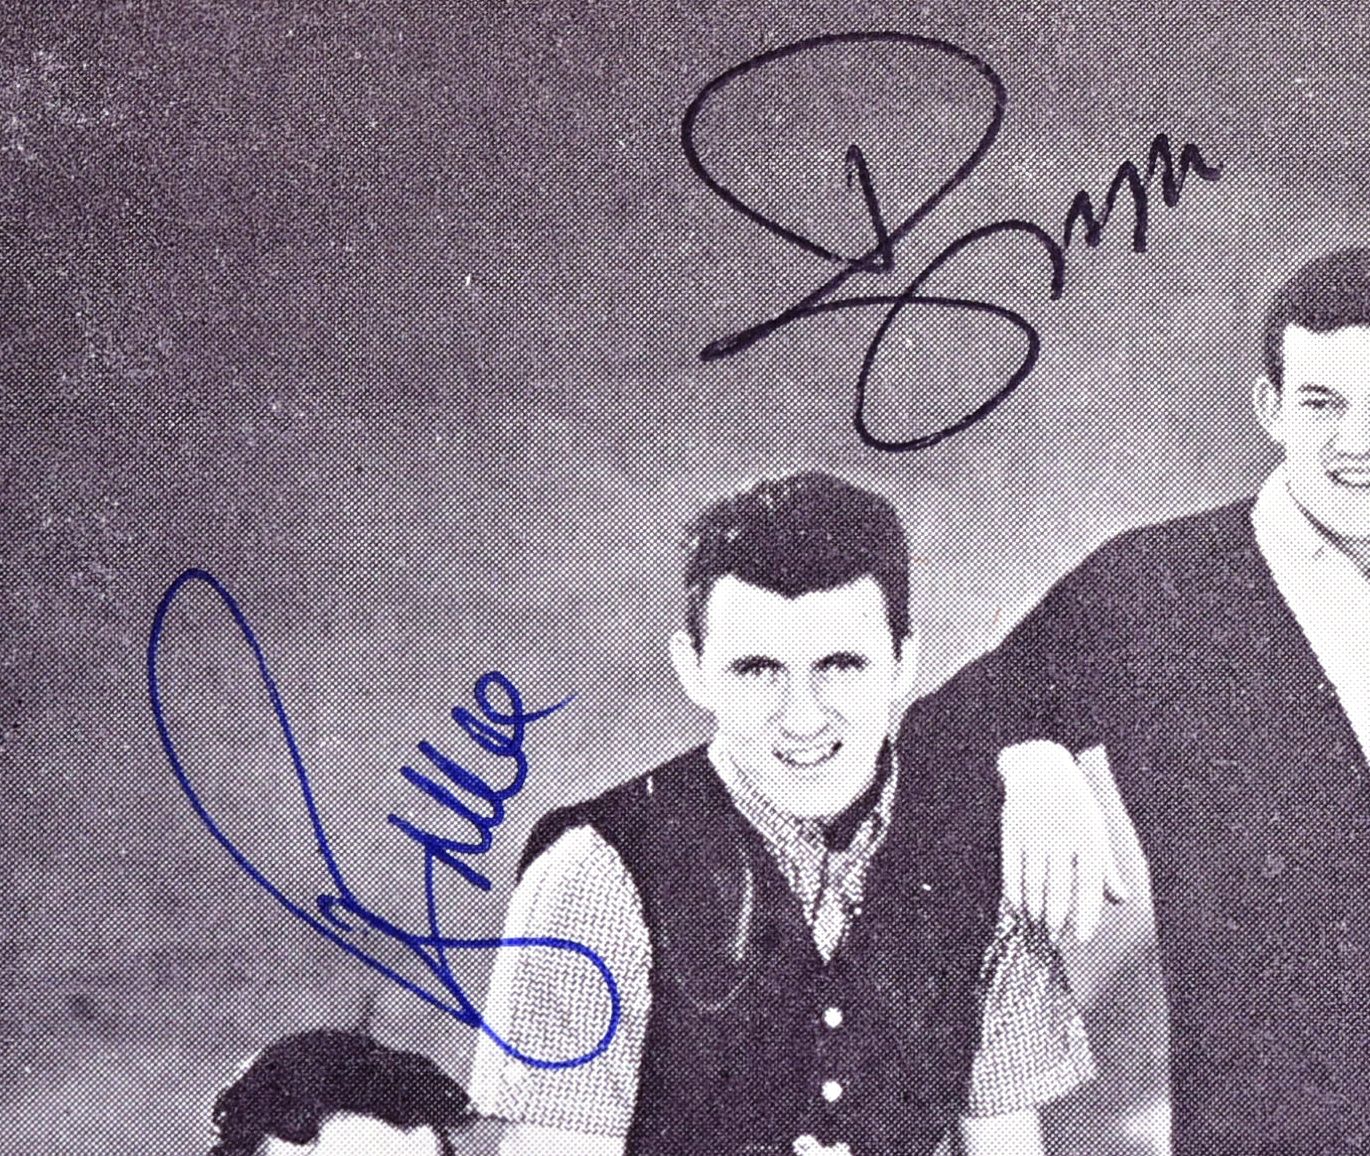 THE SHADOWS - ROCK & ROLL GROUP - EARLY SIGNED PHOTOGRAPH - Image 2 of 3